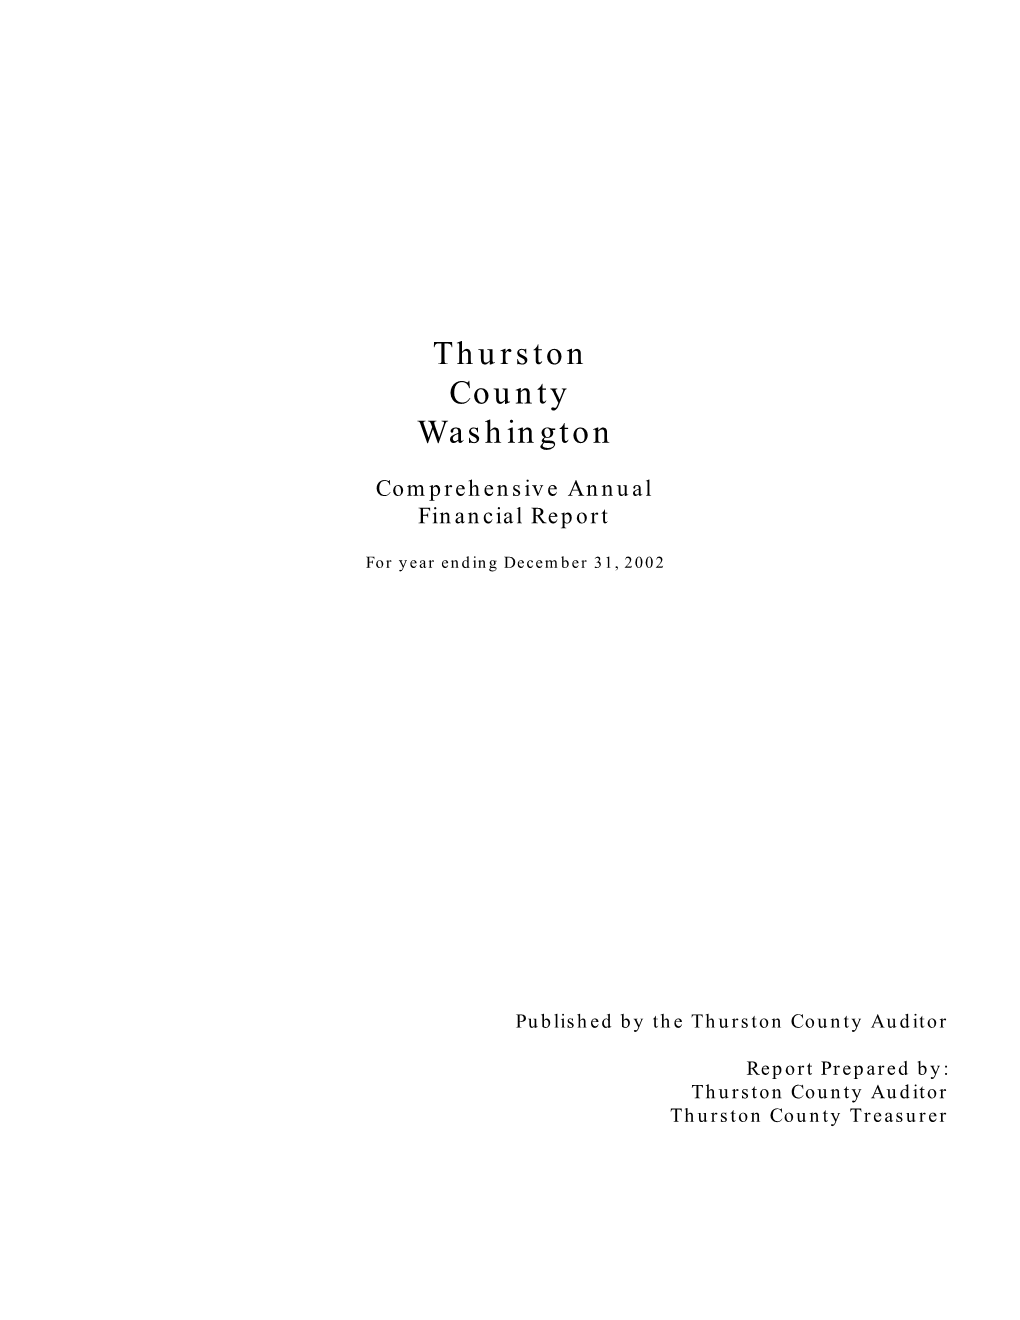 2002 Comprehensive Annual Financial Report (CAFR) of the Thurston County Government for Your Review